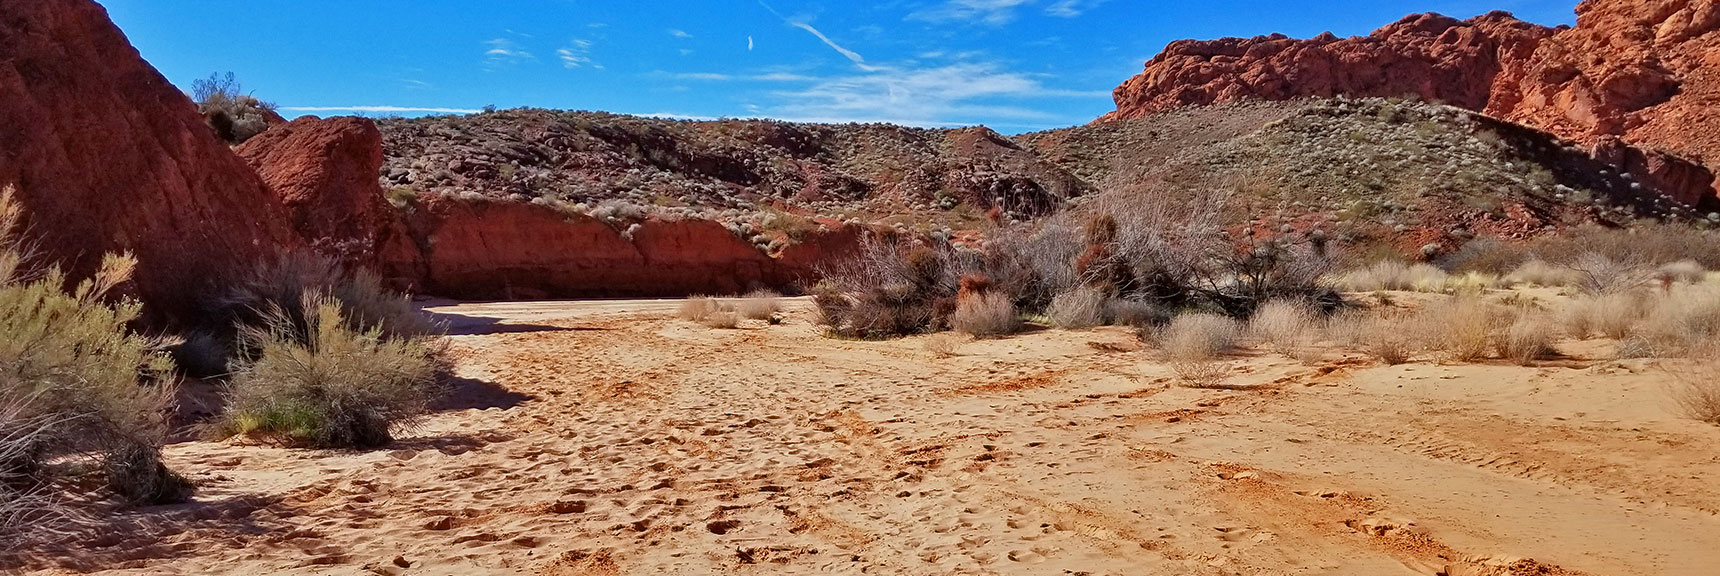 Heading Toward Fire Canyon on Natural Arches Trail, Valley of Fire State Park, Nevada